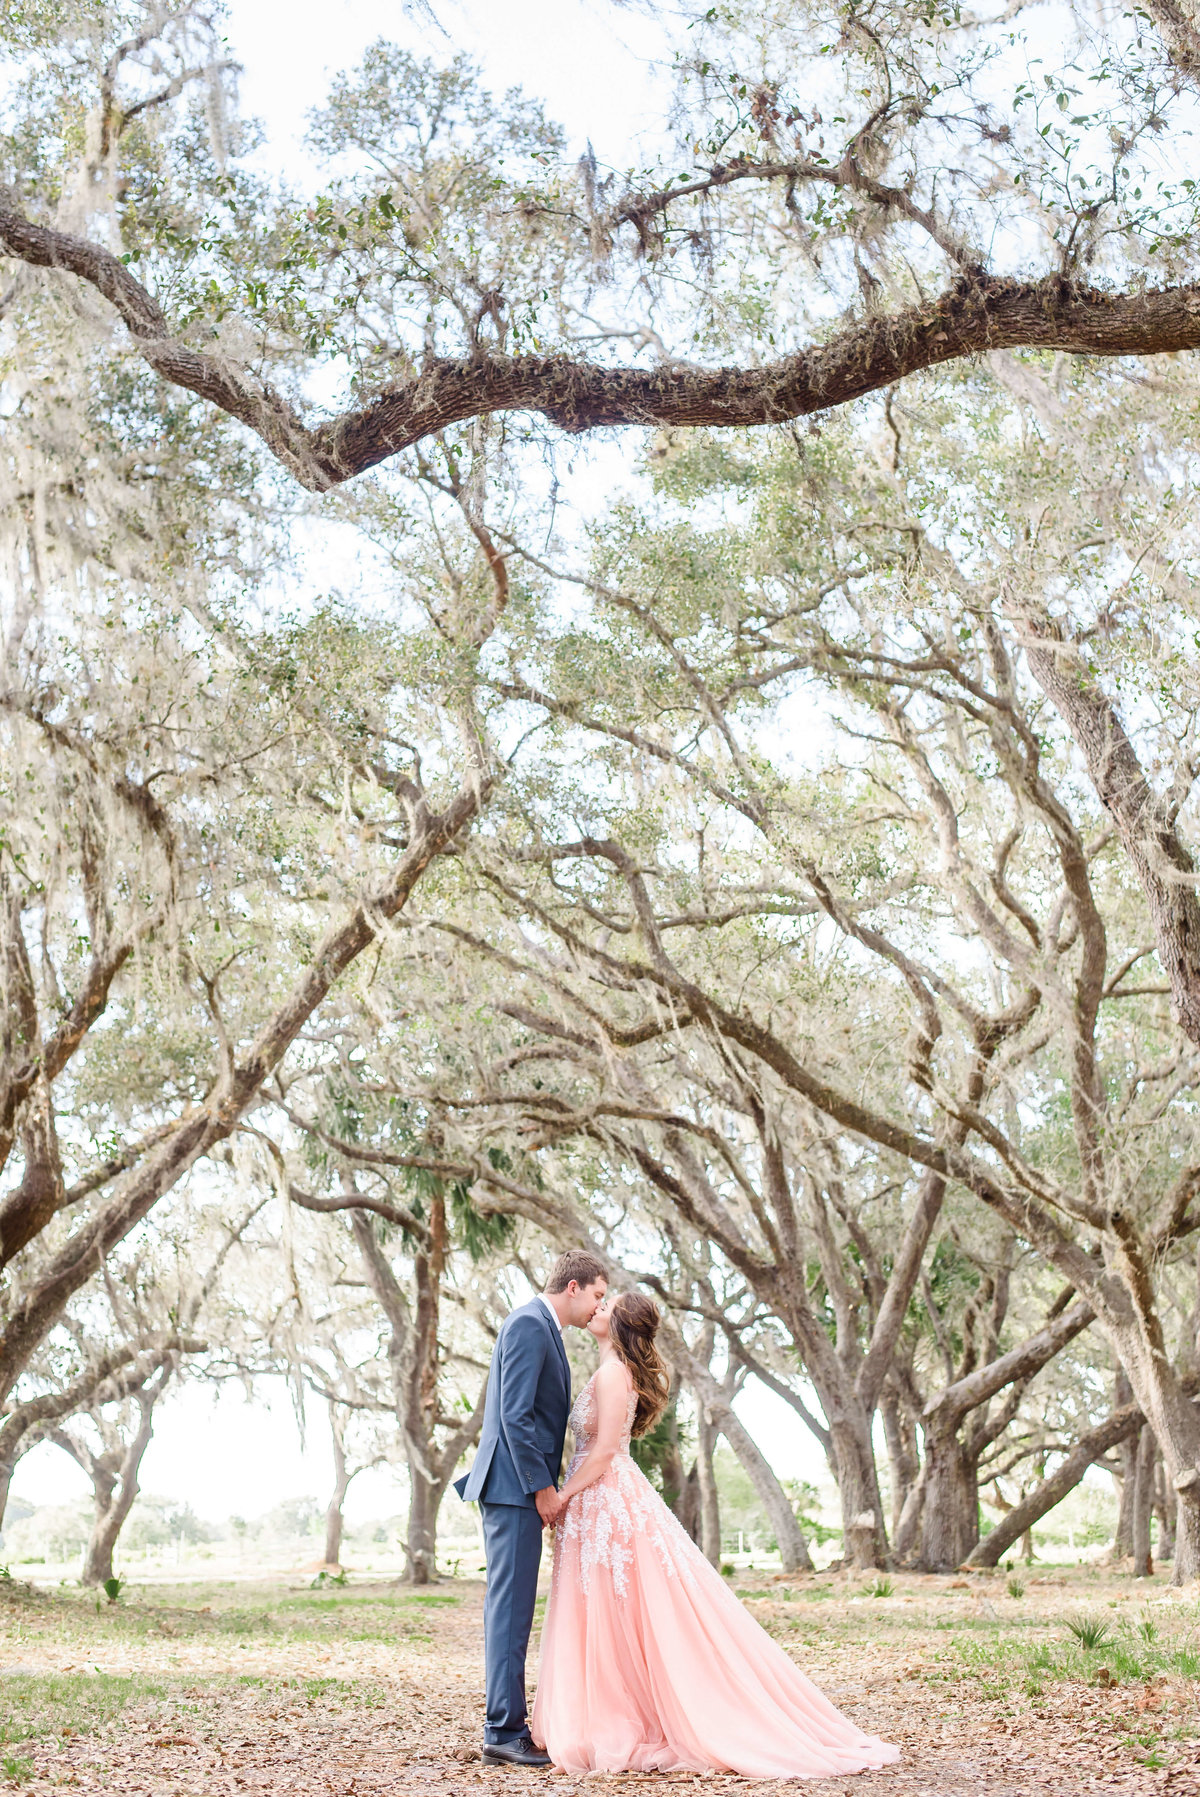 Elaborate engagement session on a private ranch covered with old oak trees and spanish moss